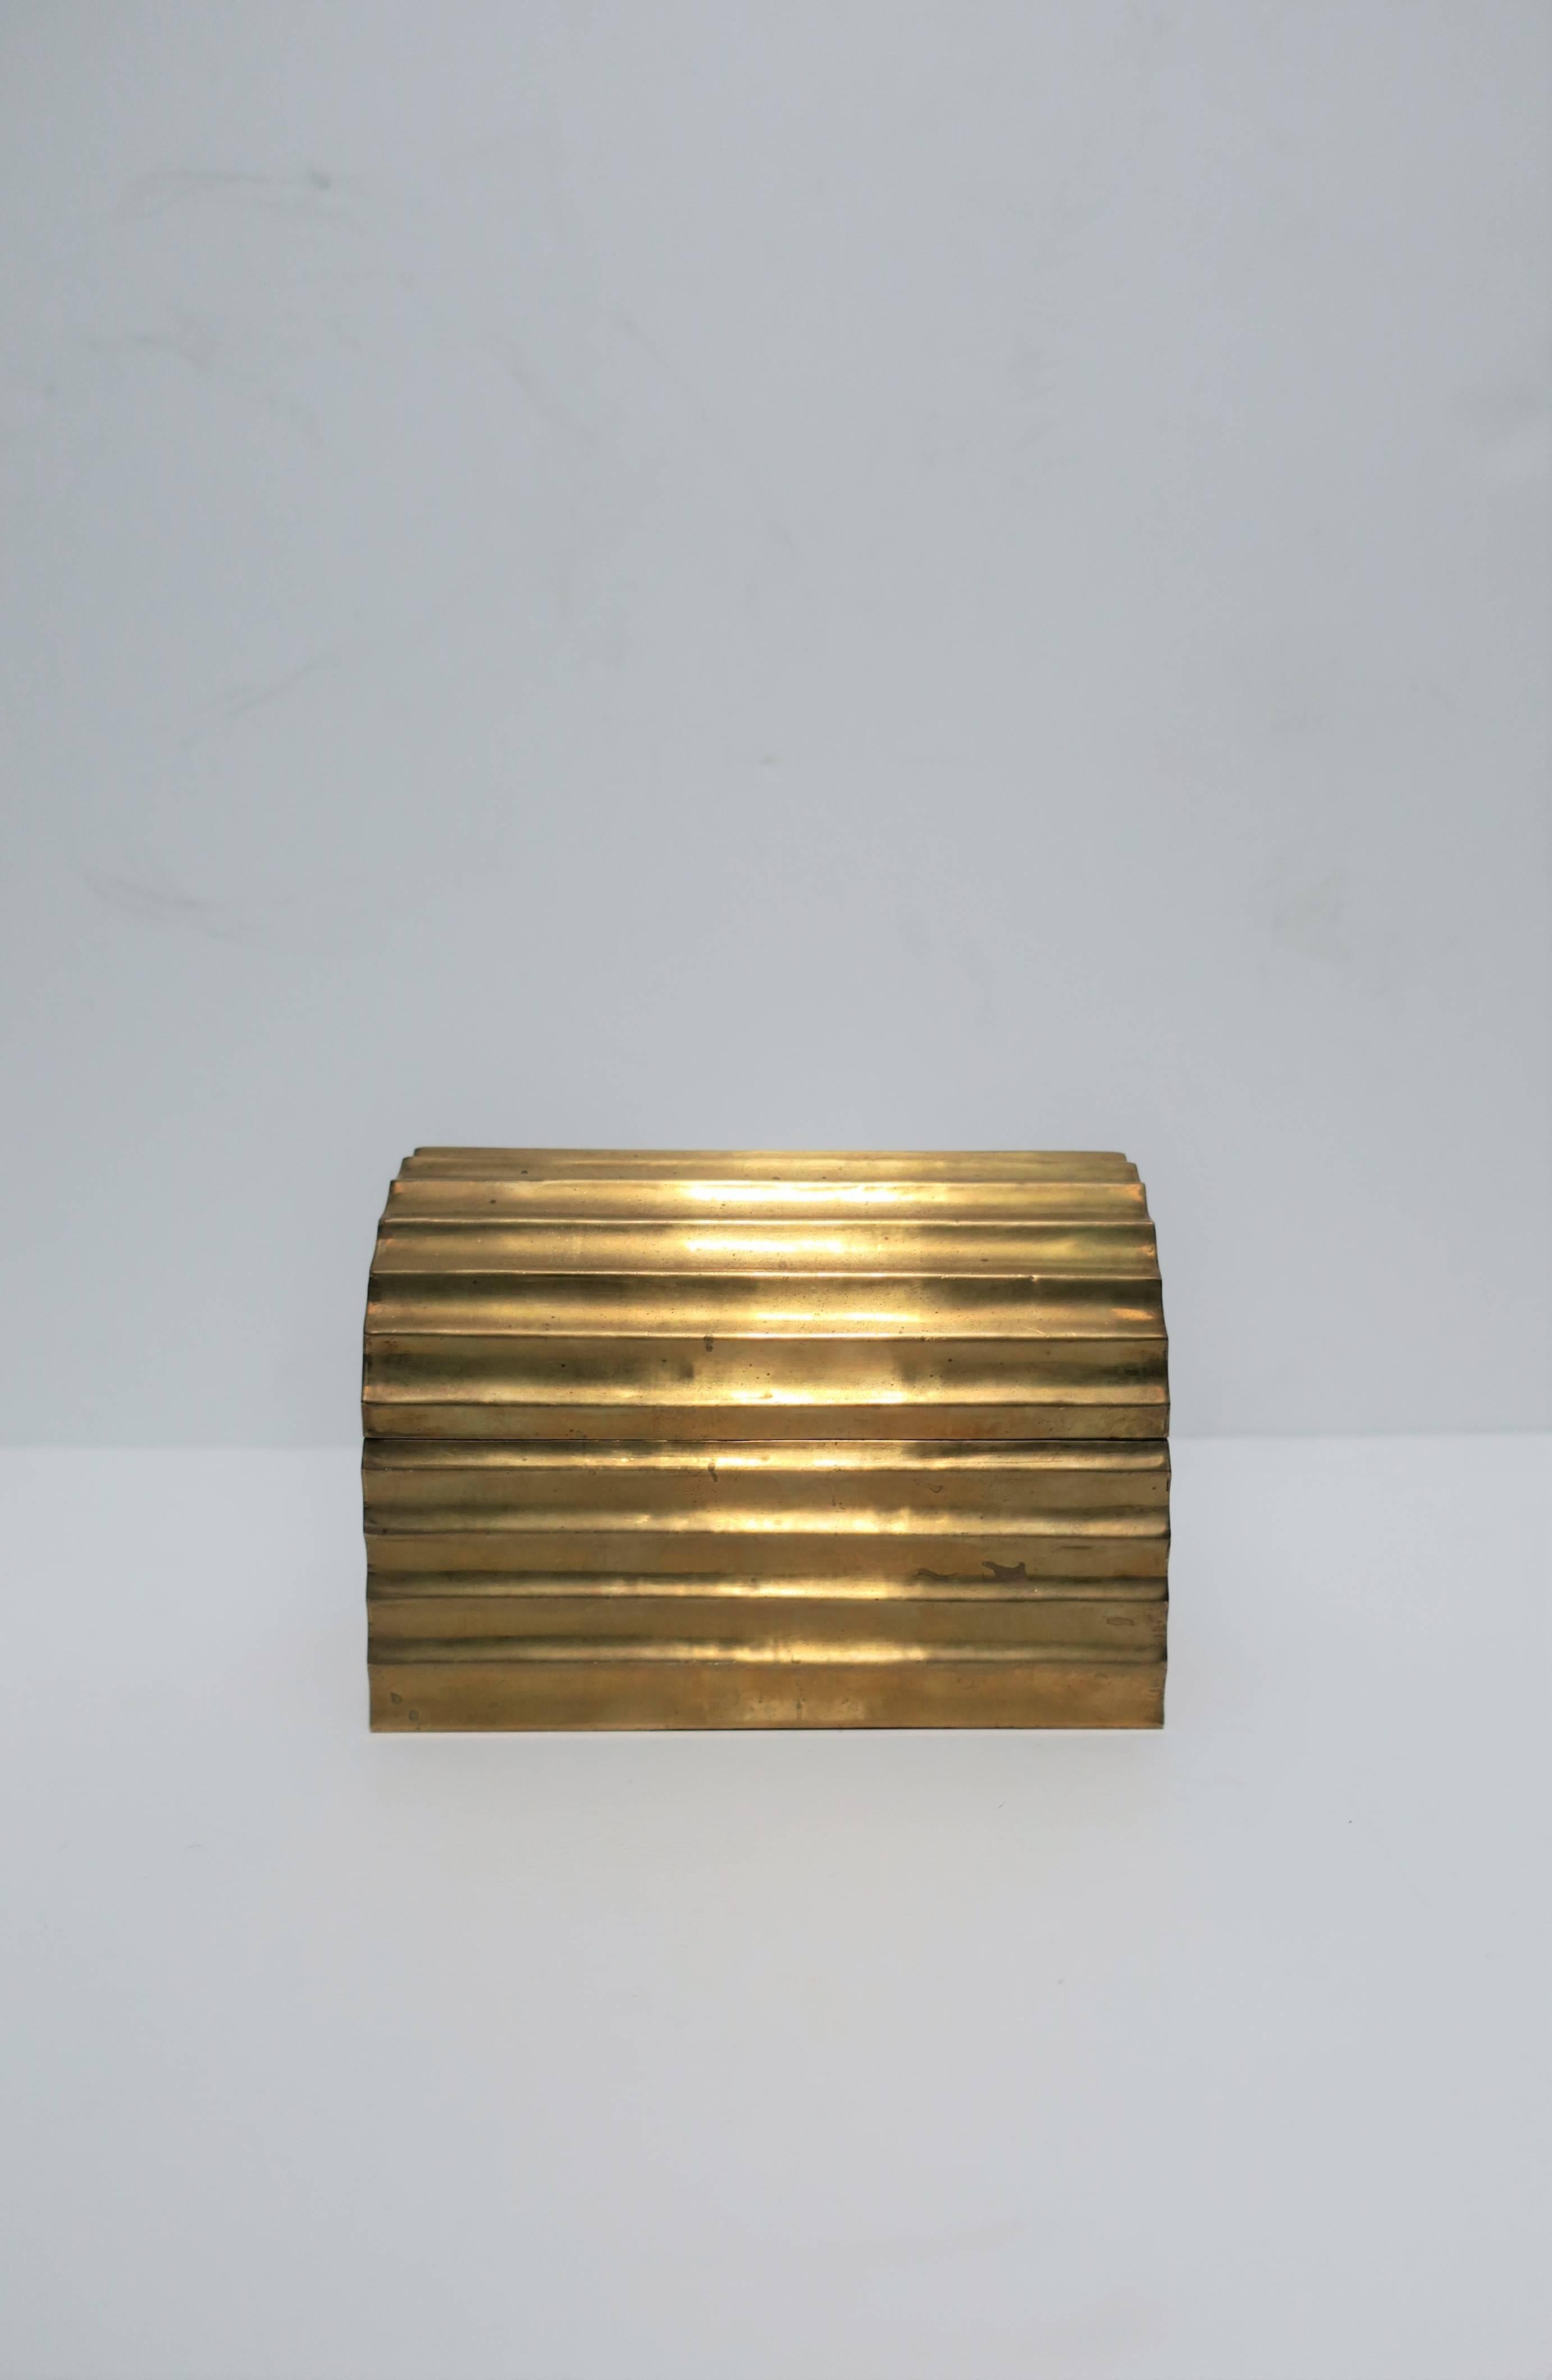 A beautiful vintage brass box with fluting and a dome or arch shape lid, circa 1970s. 

Box measures: 4.50 inches D x 6.13 inches W x 4.38 inches H.

